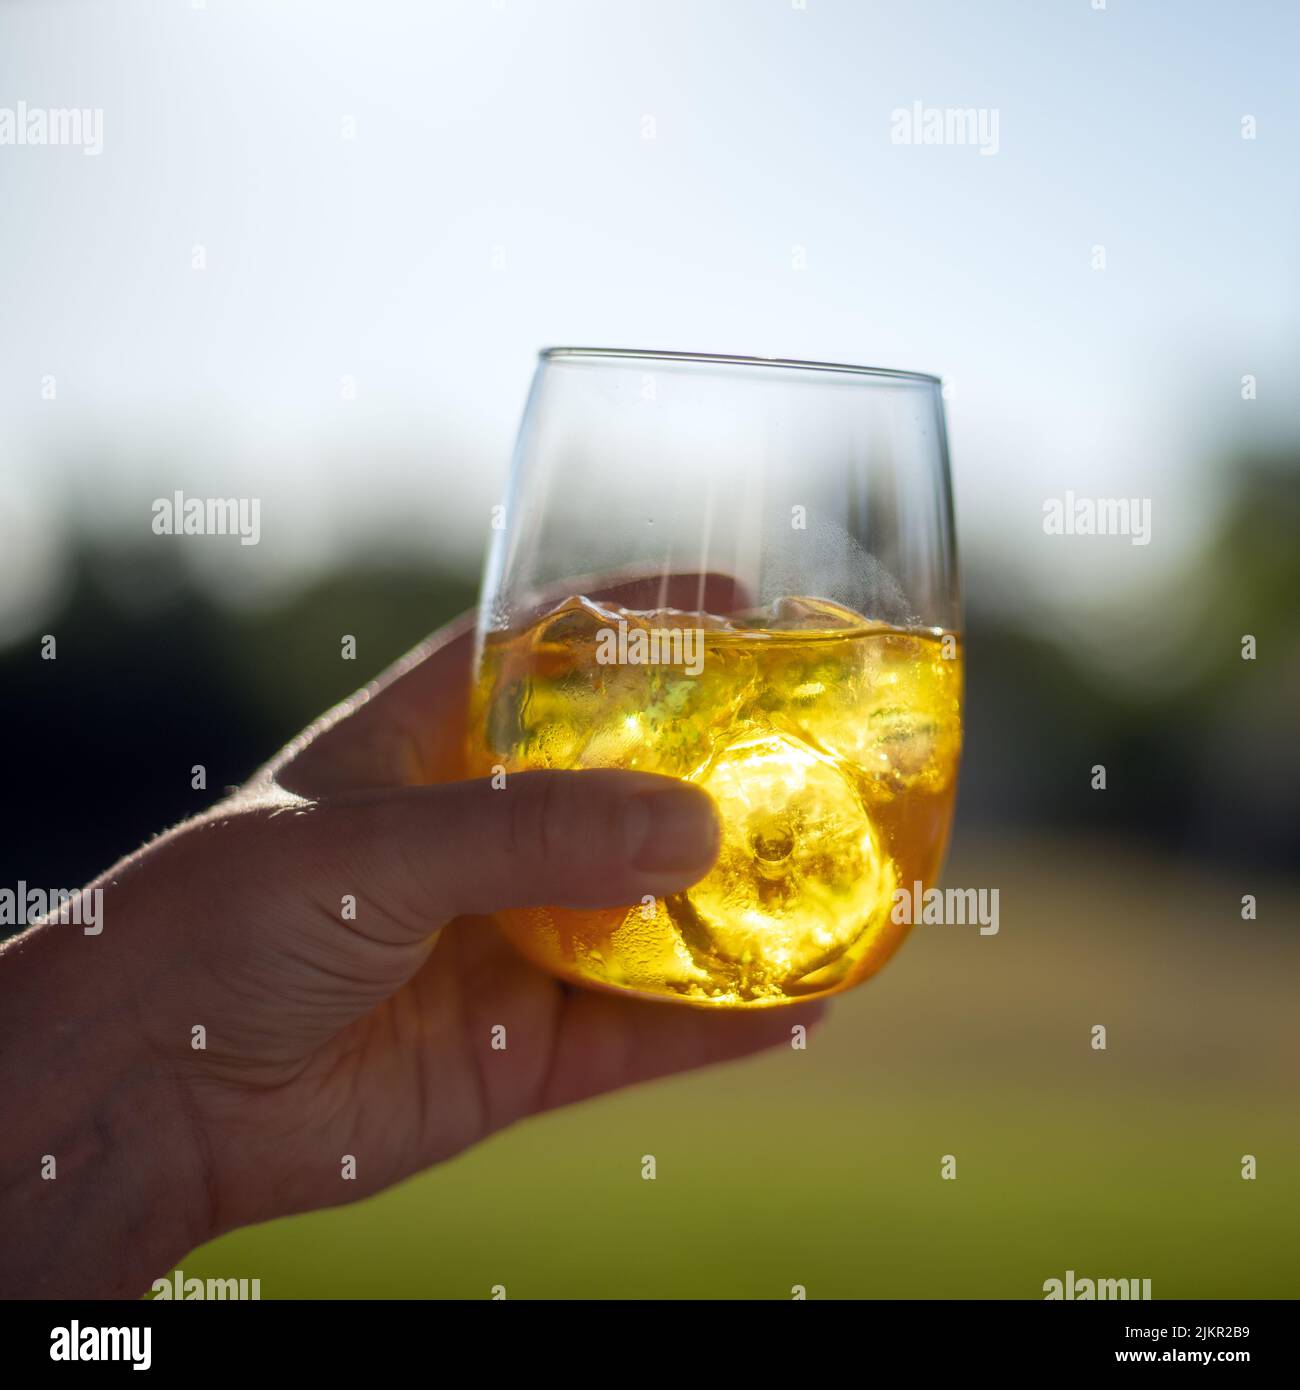 Evening light highlights a glass of Suze (a bitter French aperitif) in the hand. Stock Photo